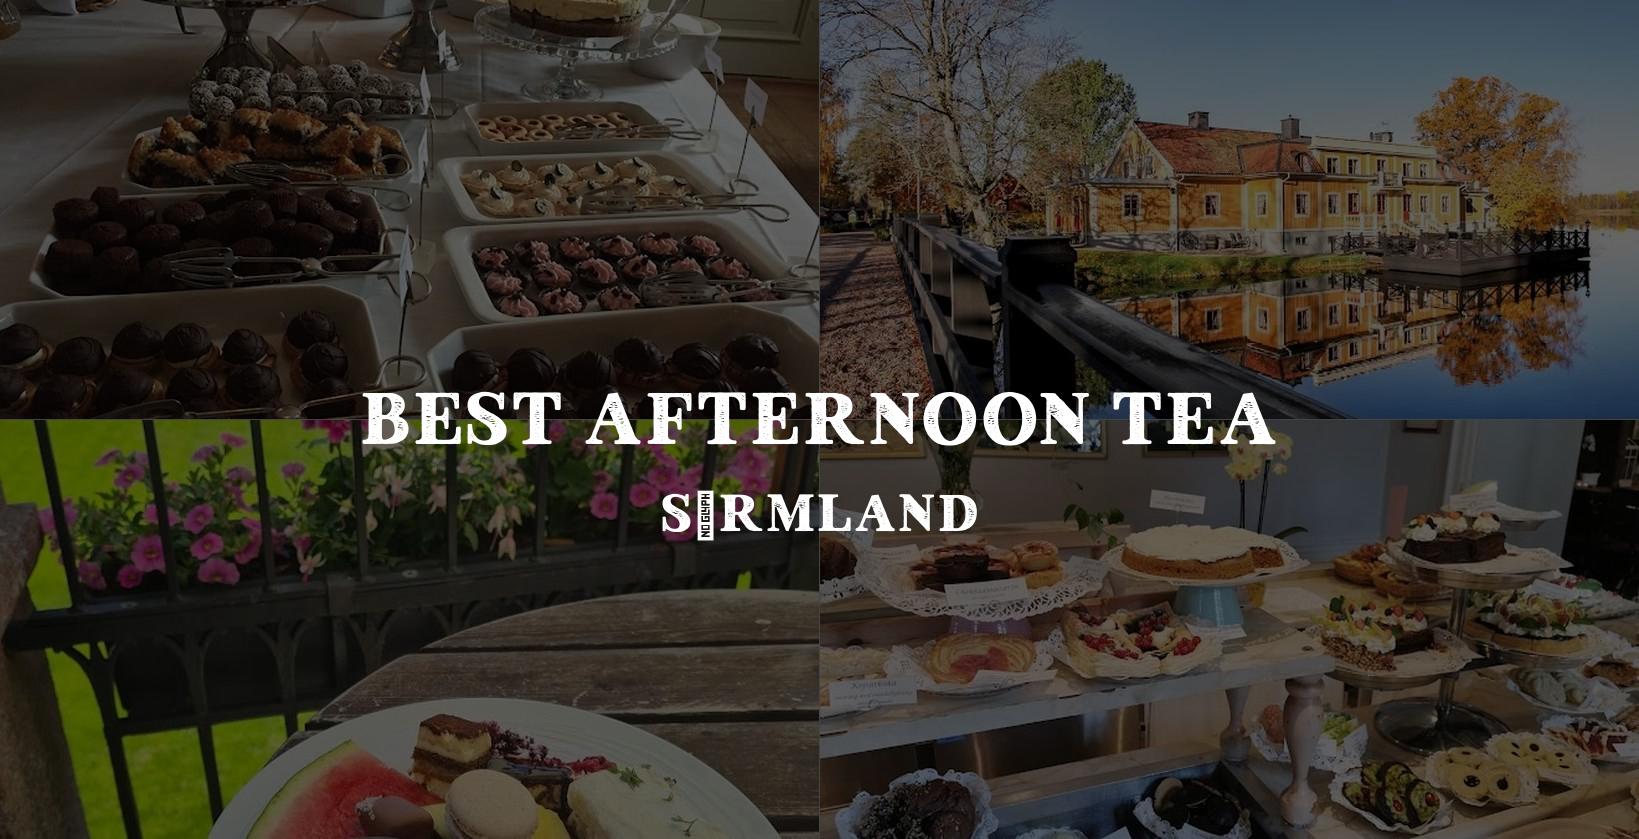 Choosing the perfect spot for afternoon tea in Sörmland